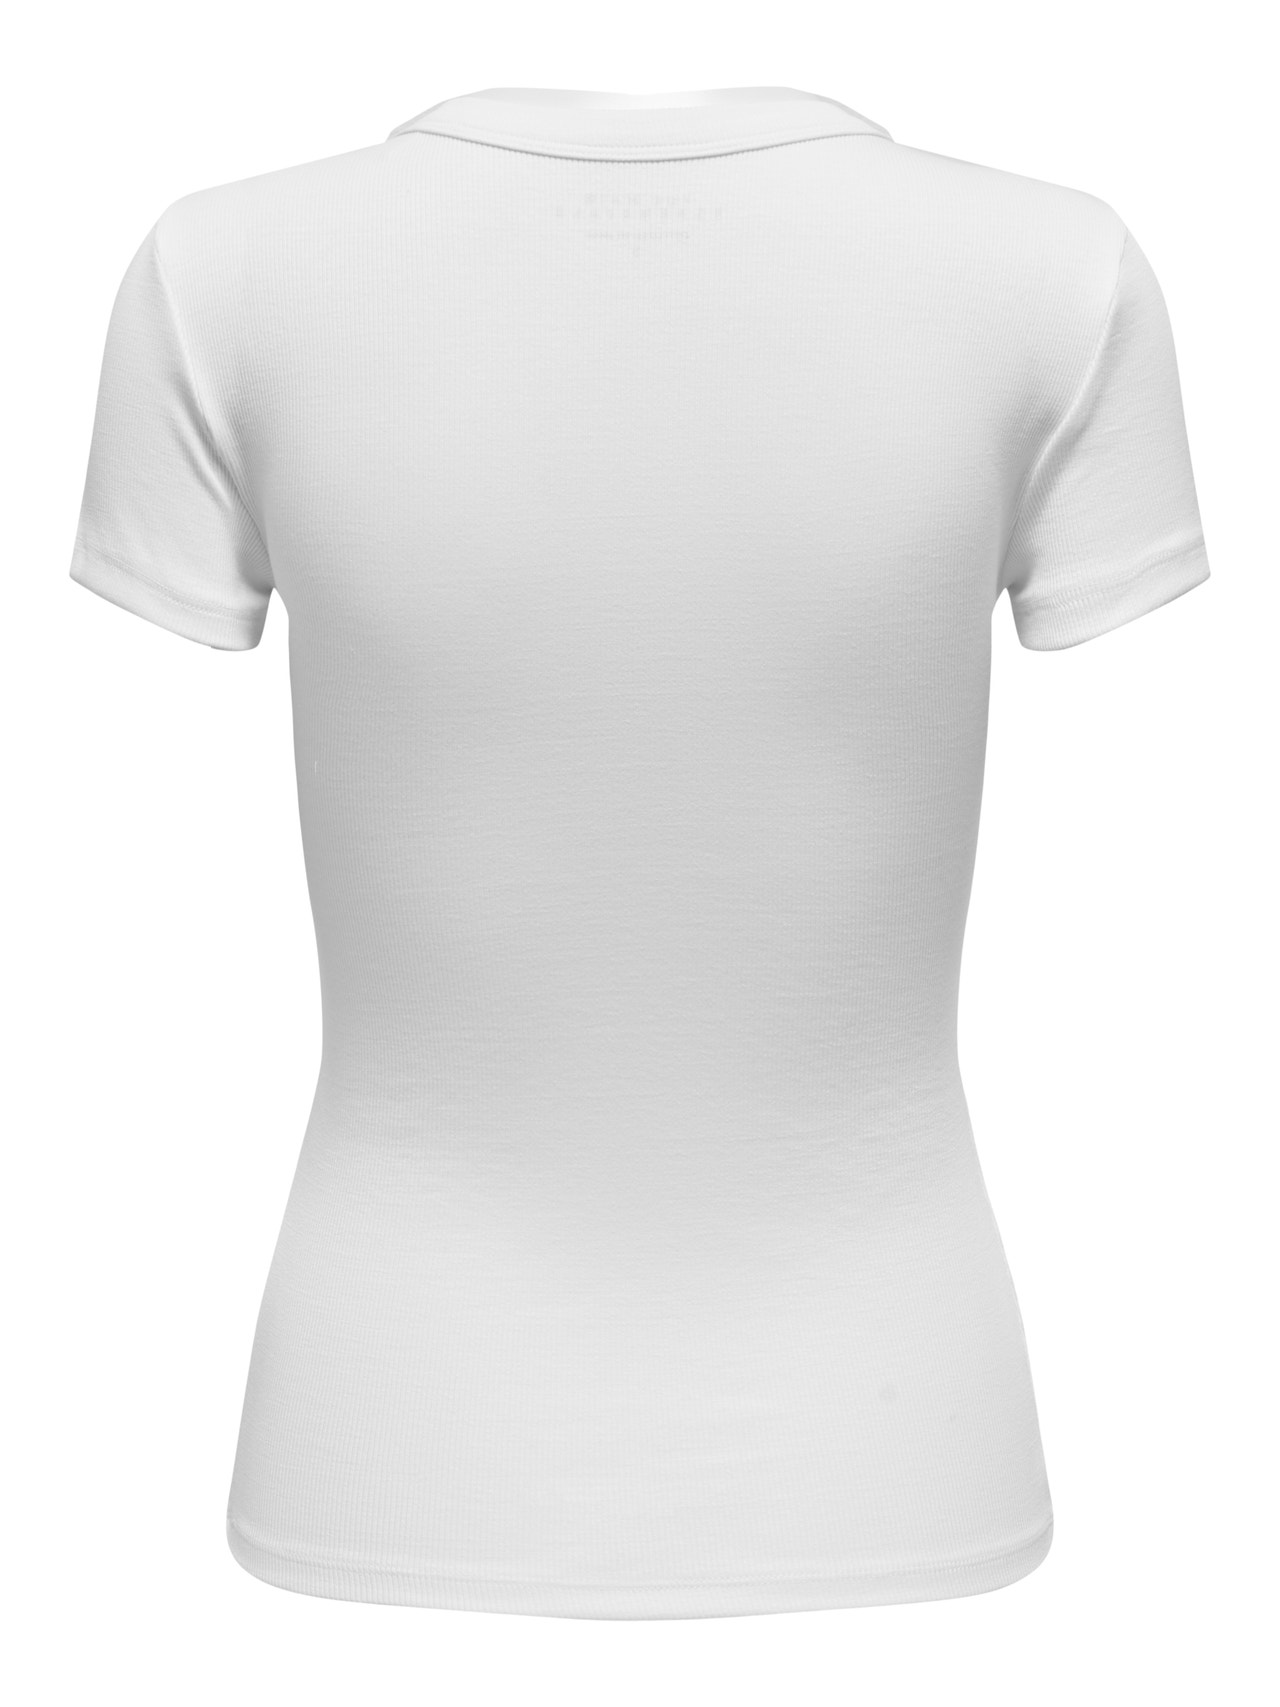 ONLY Top Regular Fit Paricollo -Bright White - 15330639